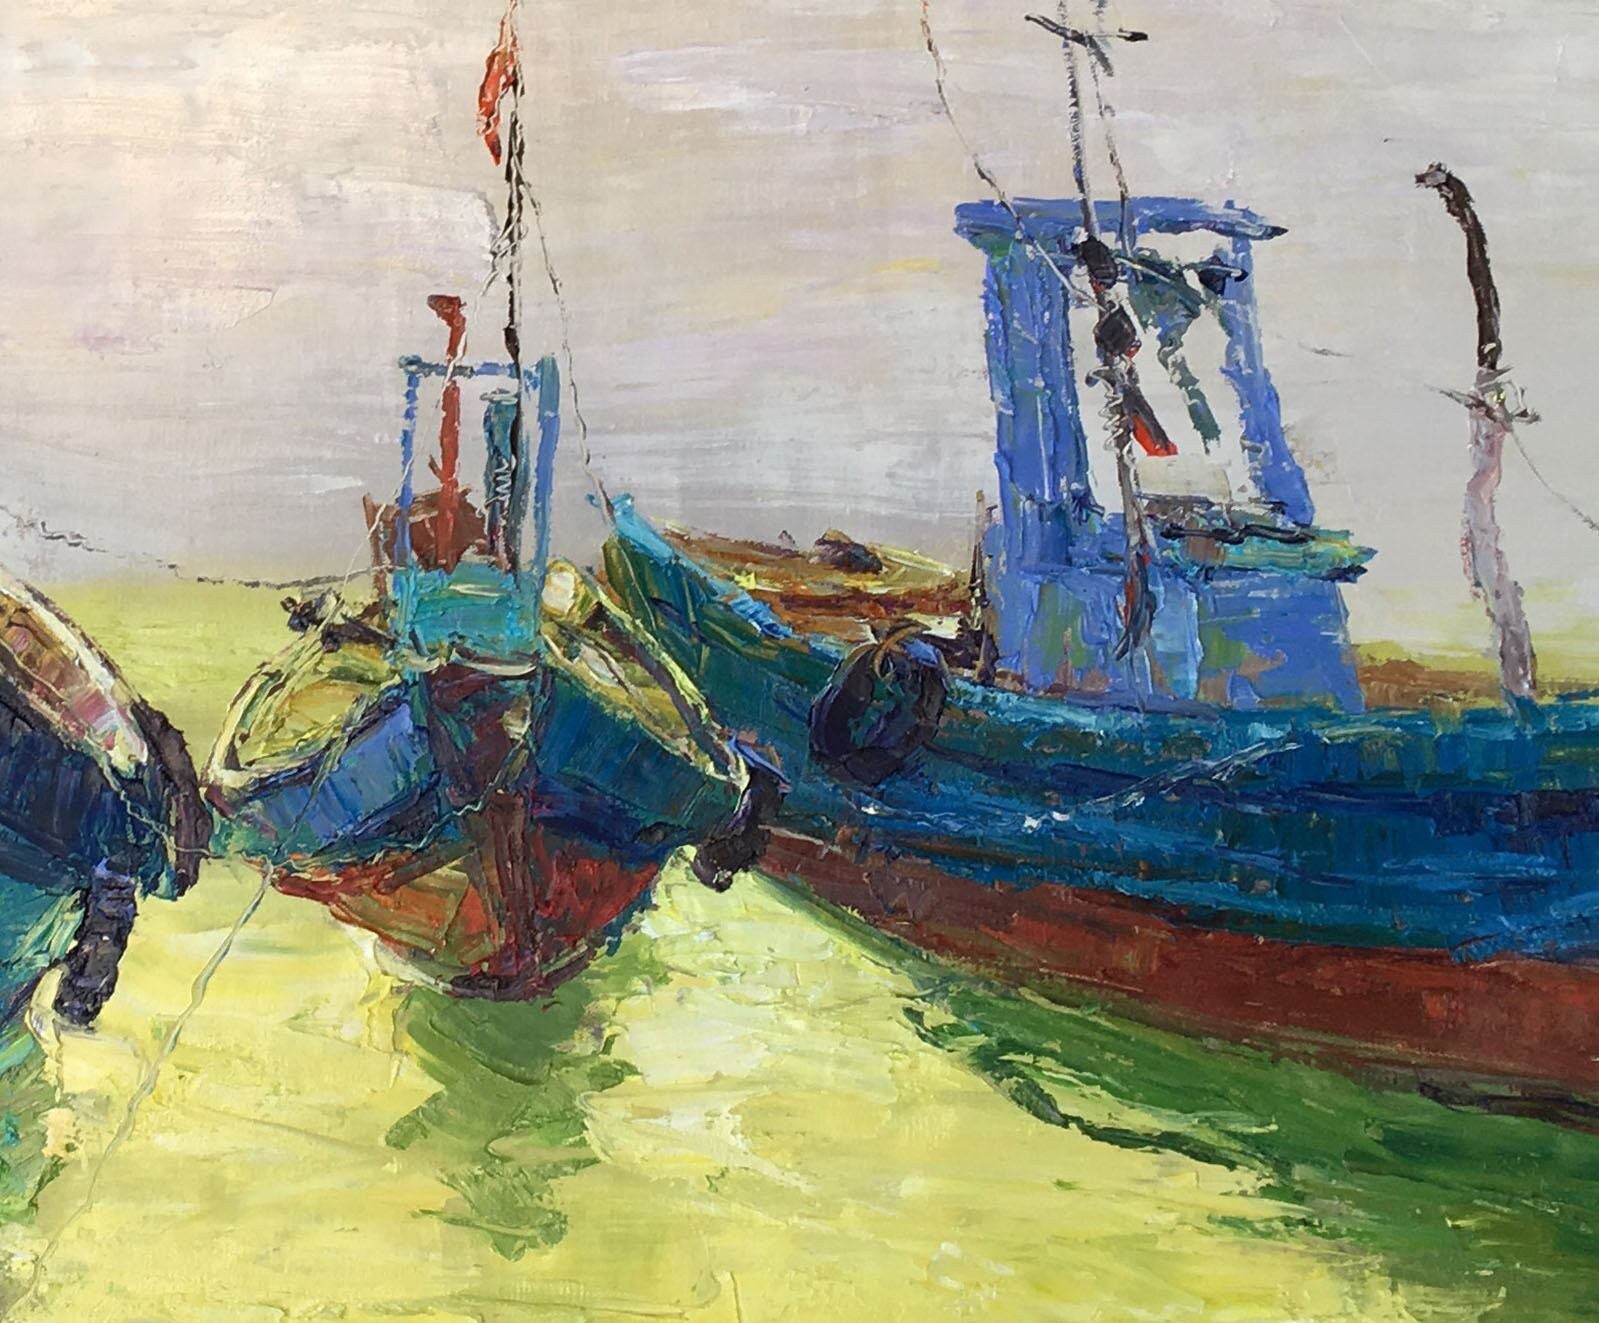 Original Oil Painting Fishing Boats Seascape, Oil On Canvas, Large Oil Painting Original Canvas, Rustic Oil Painting, Impasto Oil Painting